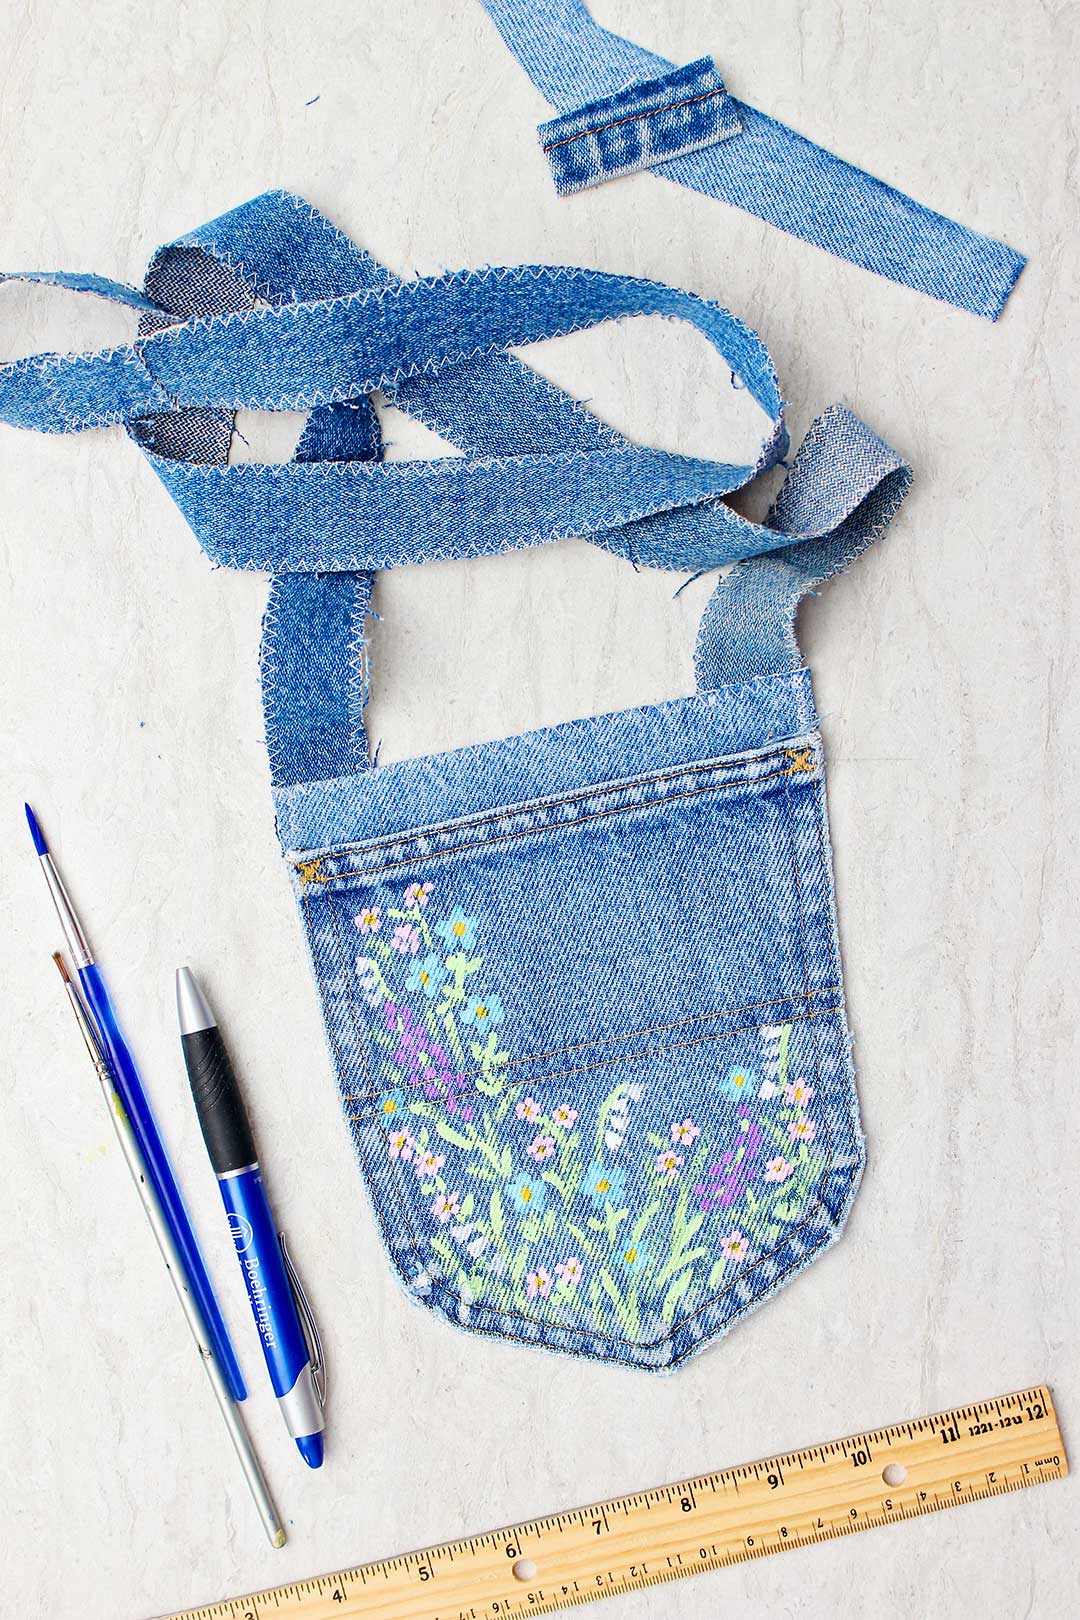 Amazon.com: Girly Blue Jeans Purse with Lace and Appliques in Shabby Style,  Romantic Upcycled Denim Shoulder Bag, Birthday Gift for Her, StorieBag  Design for Happiness Series : Handmade Products